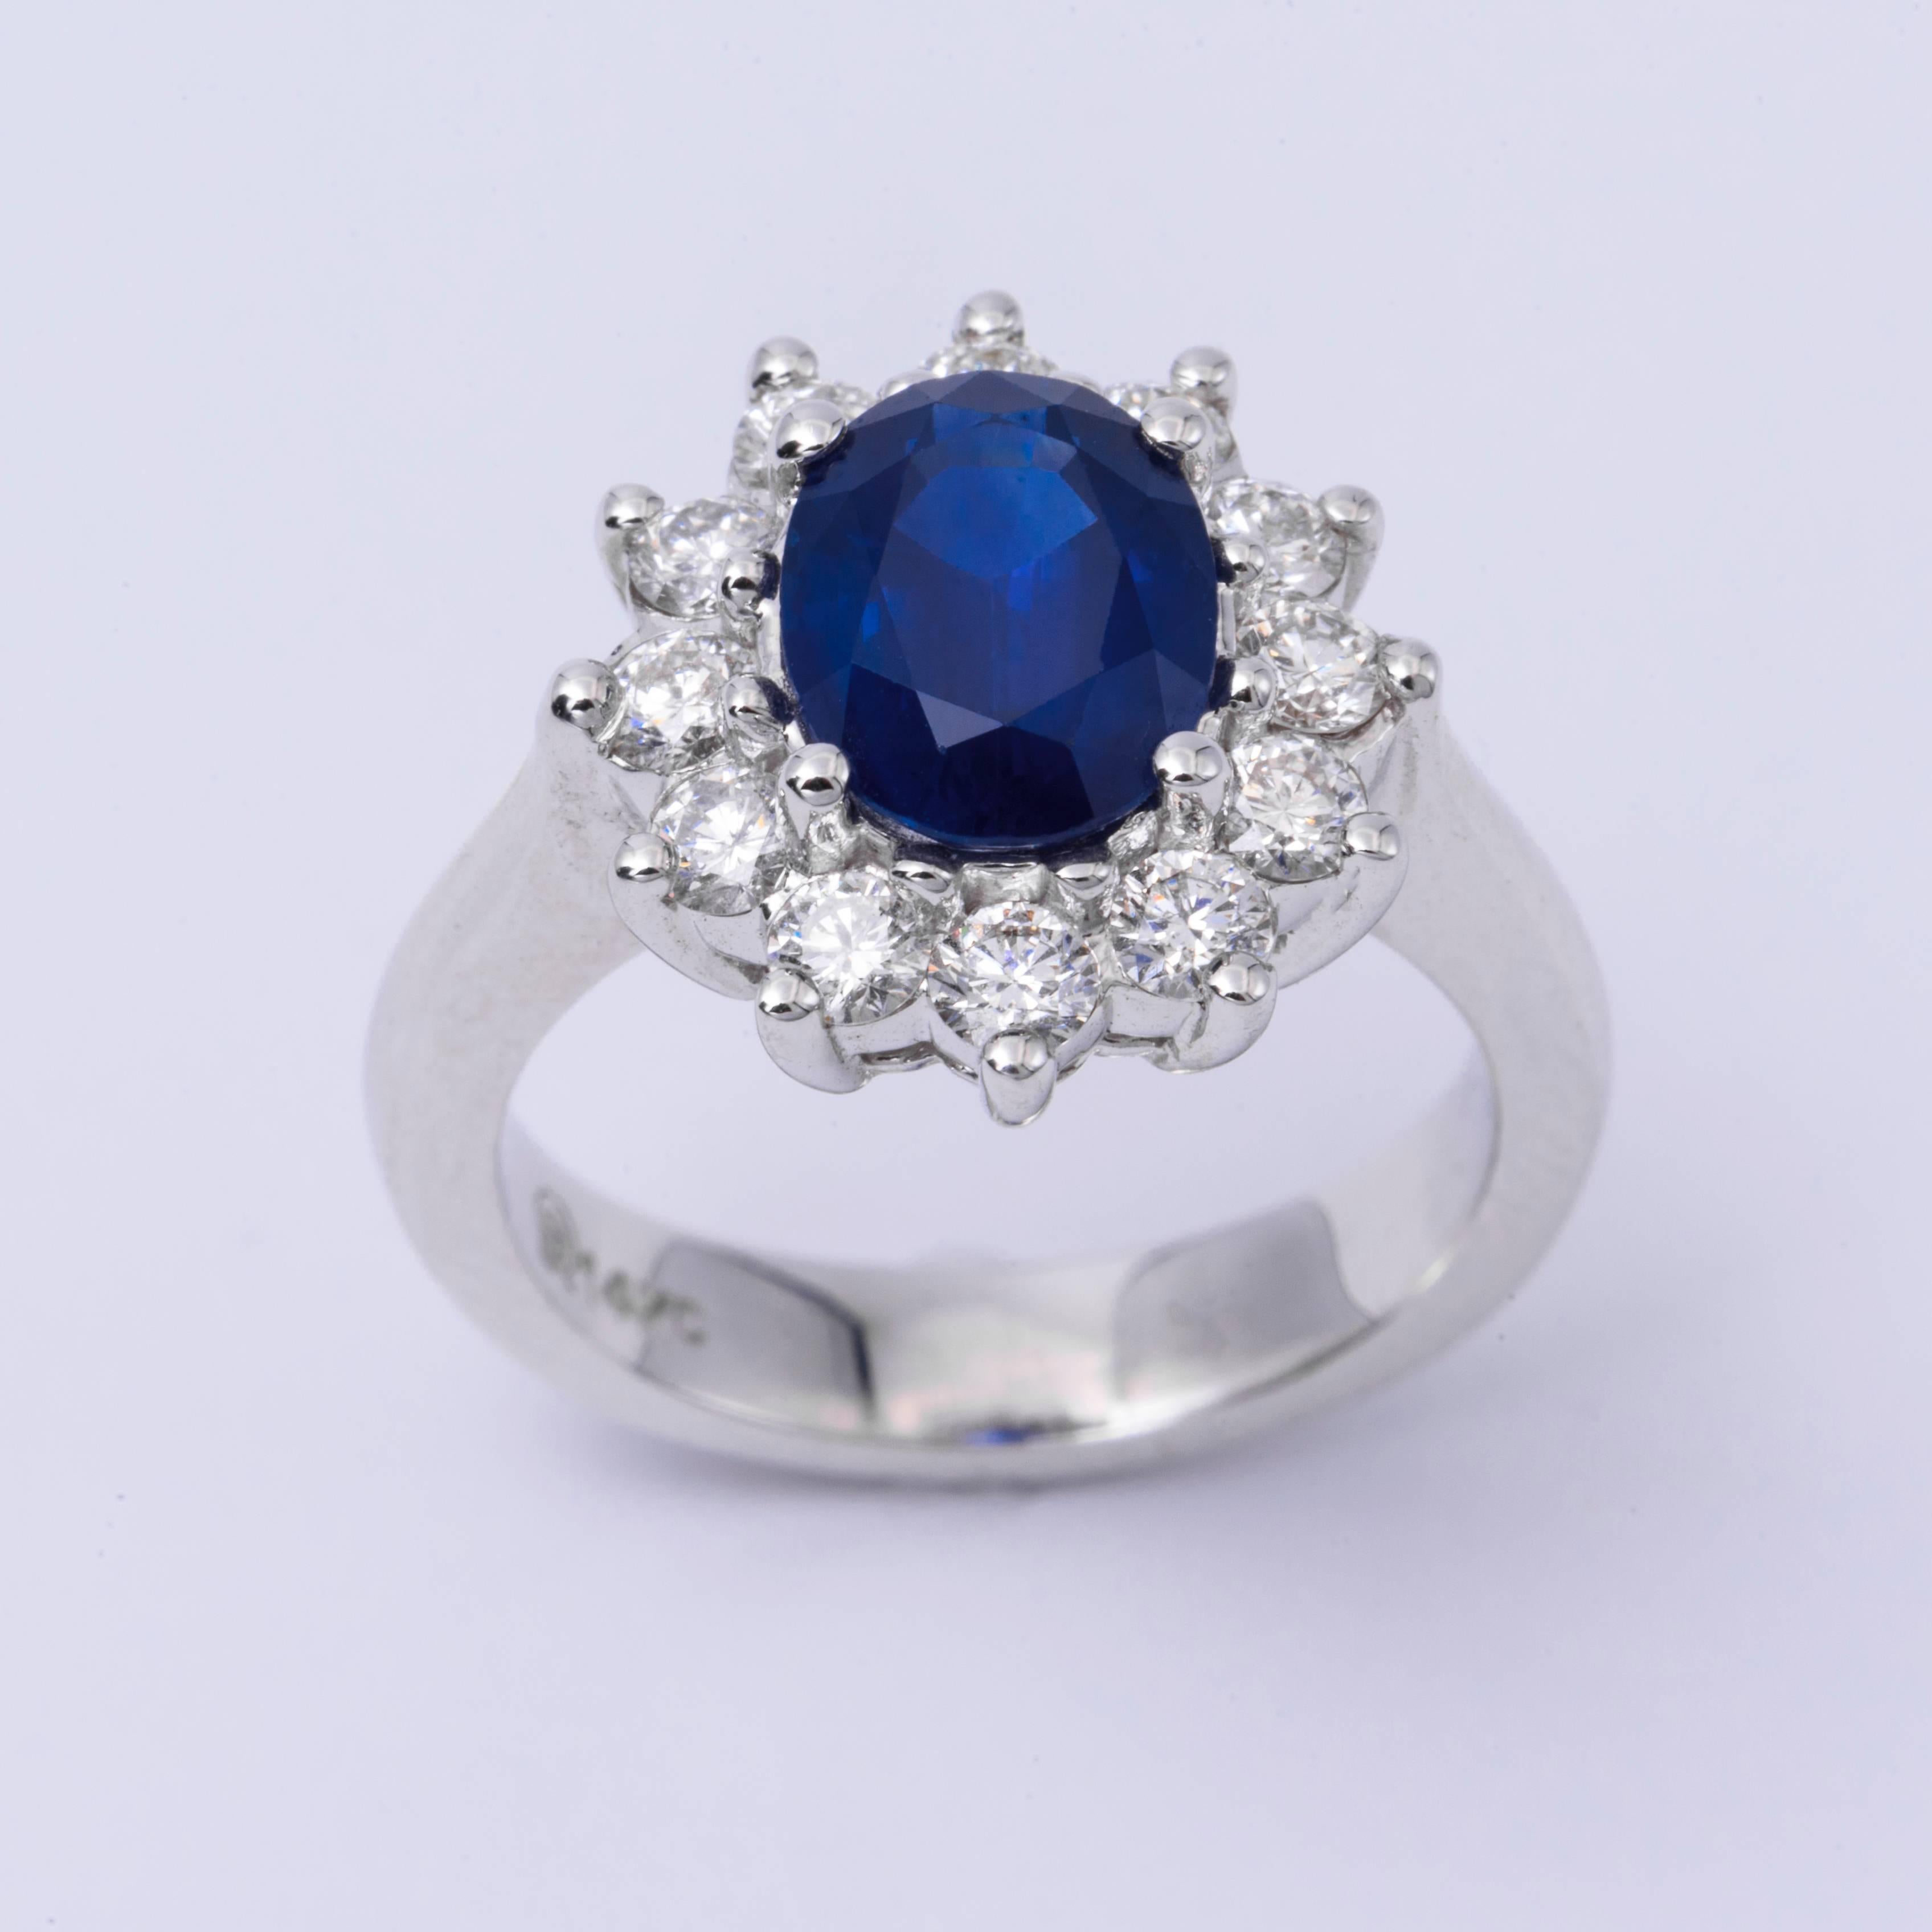 Style: 14k Oval Shape Sapphire Diamond Halo Engagement Ring
Material: 14k White Gold
Gemstone Details: 1 Oval Shape Sapphire approximately 2.49 ct. 9x7mm
Diamond Details: Approximately 0.84 ctw of diamonds. Diamonds are H in color and SI in